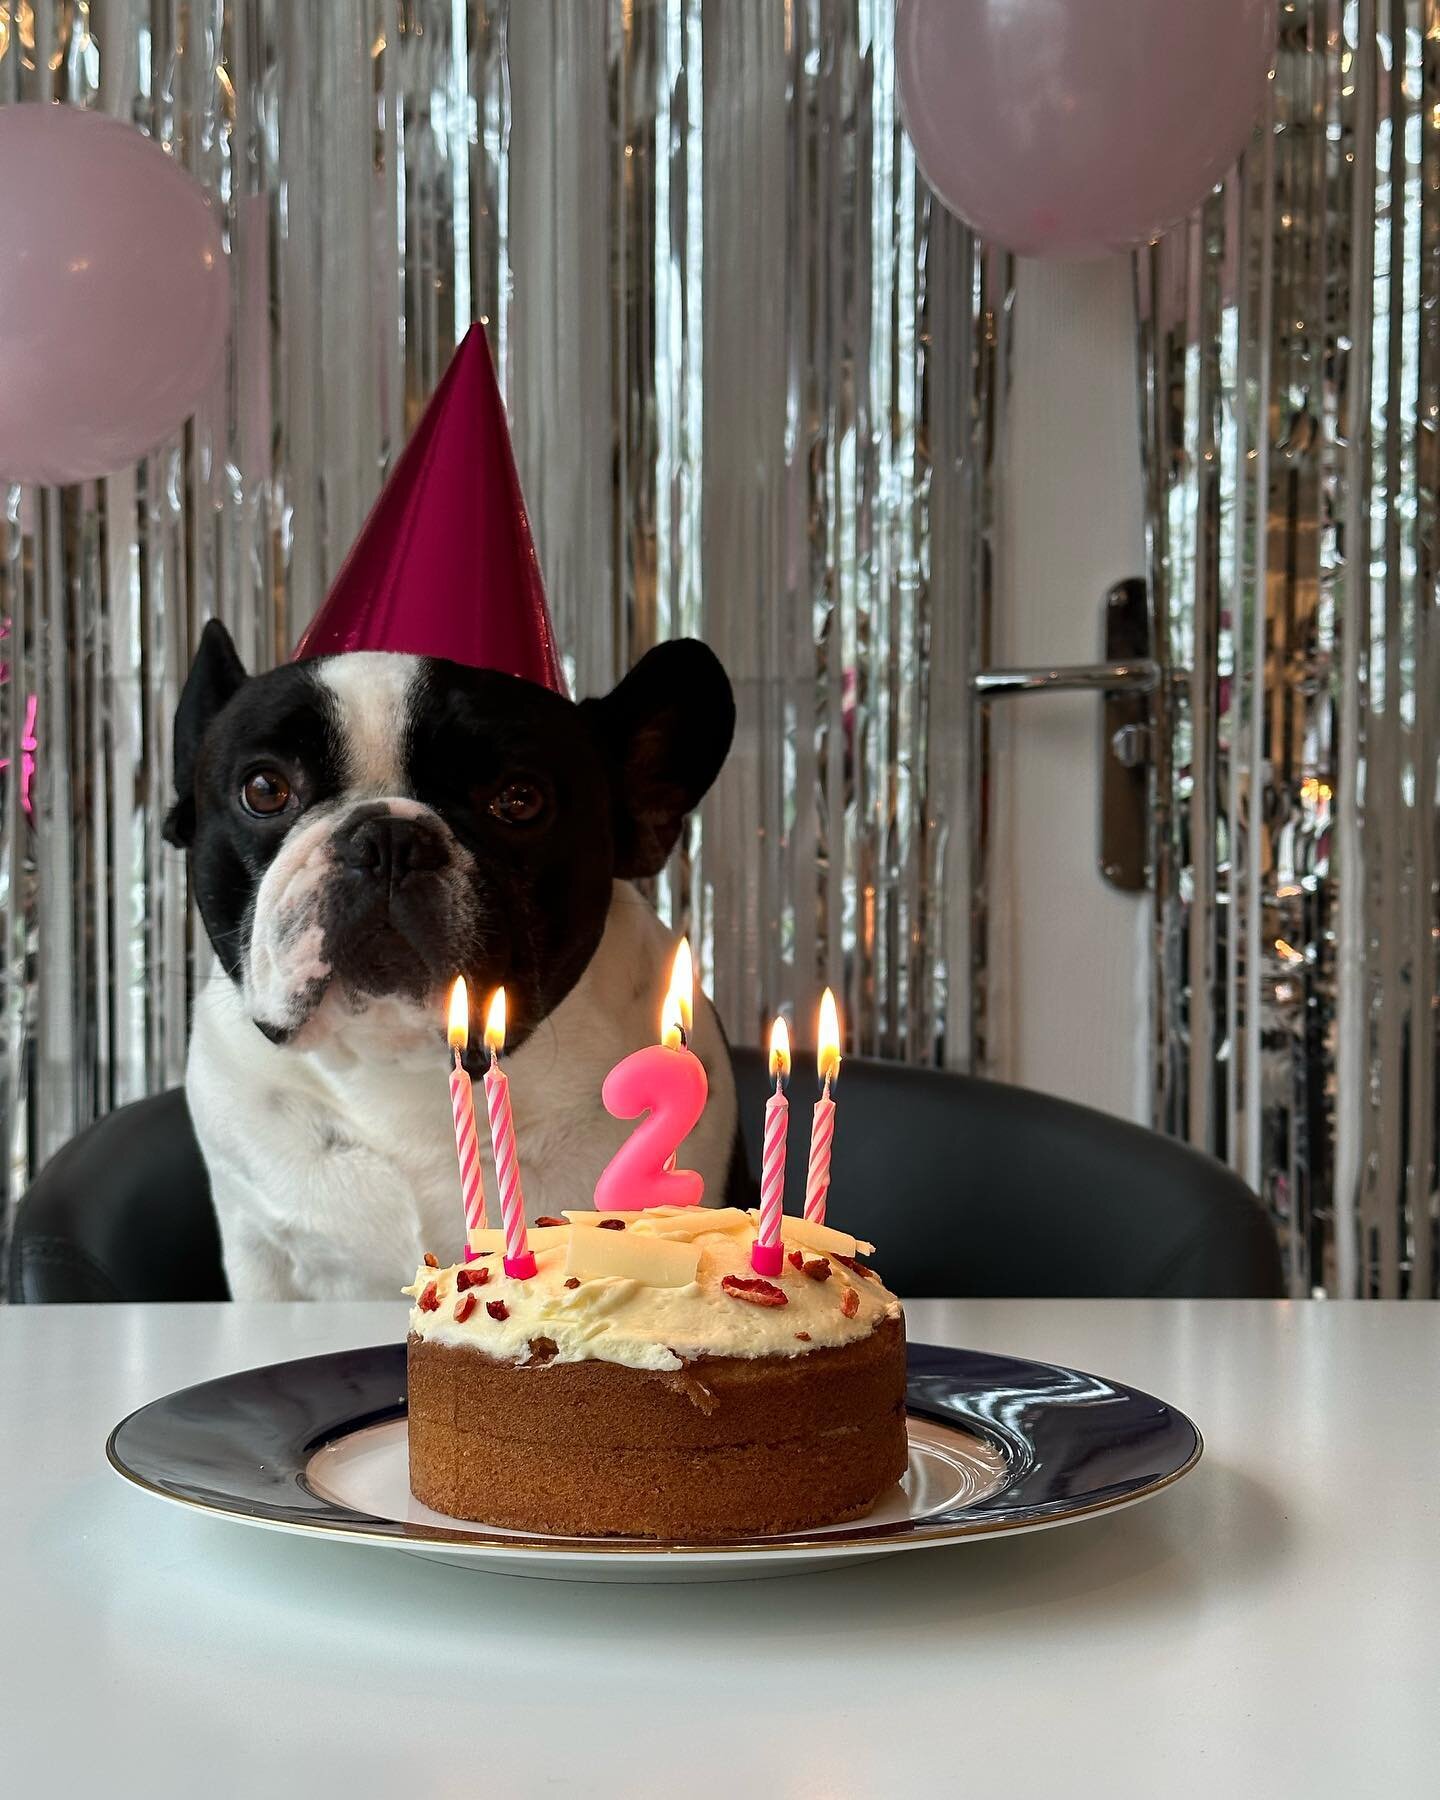 It&rsquo;s party time 🥳🥳🥳 (I am not 2, but the wise old age of 4 btw) #partydog